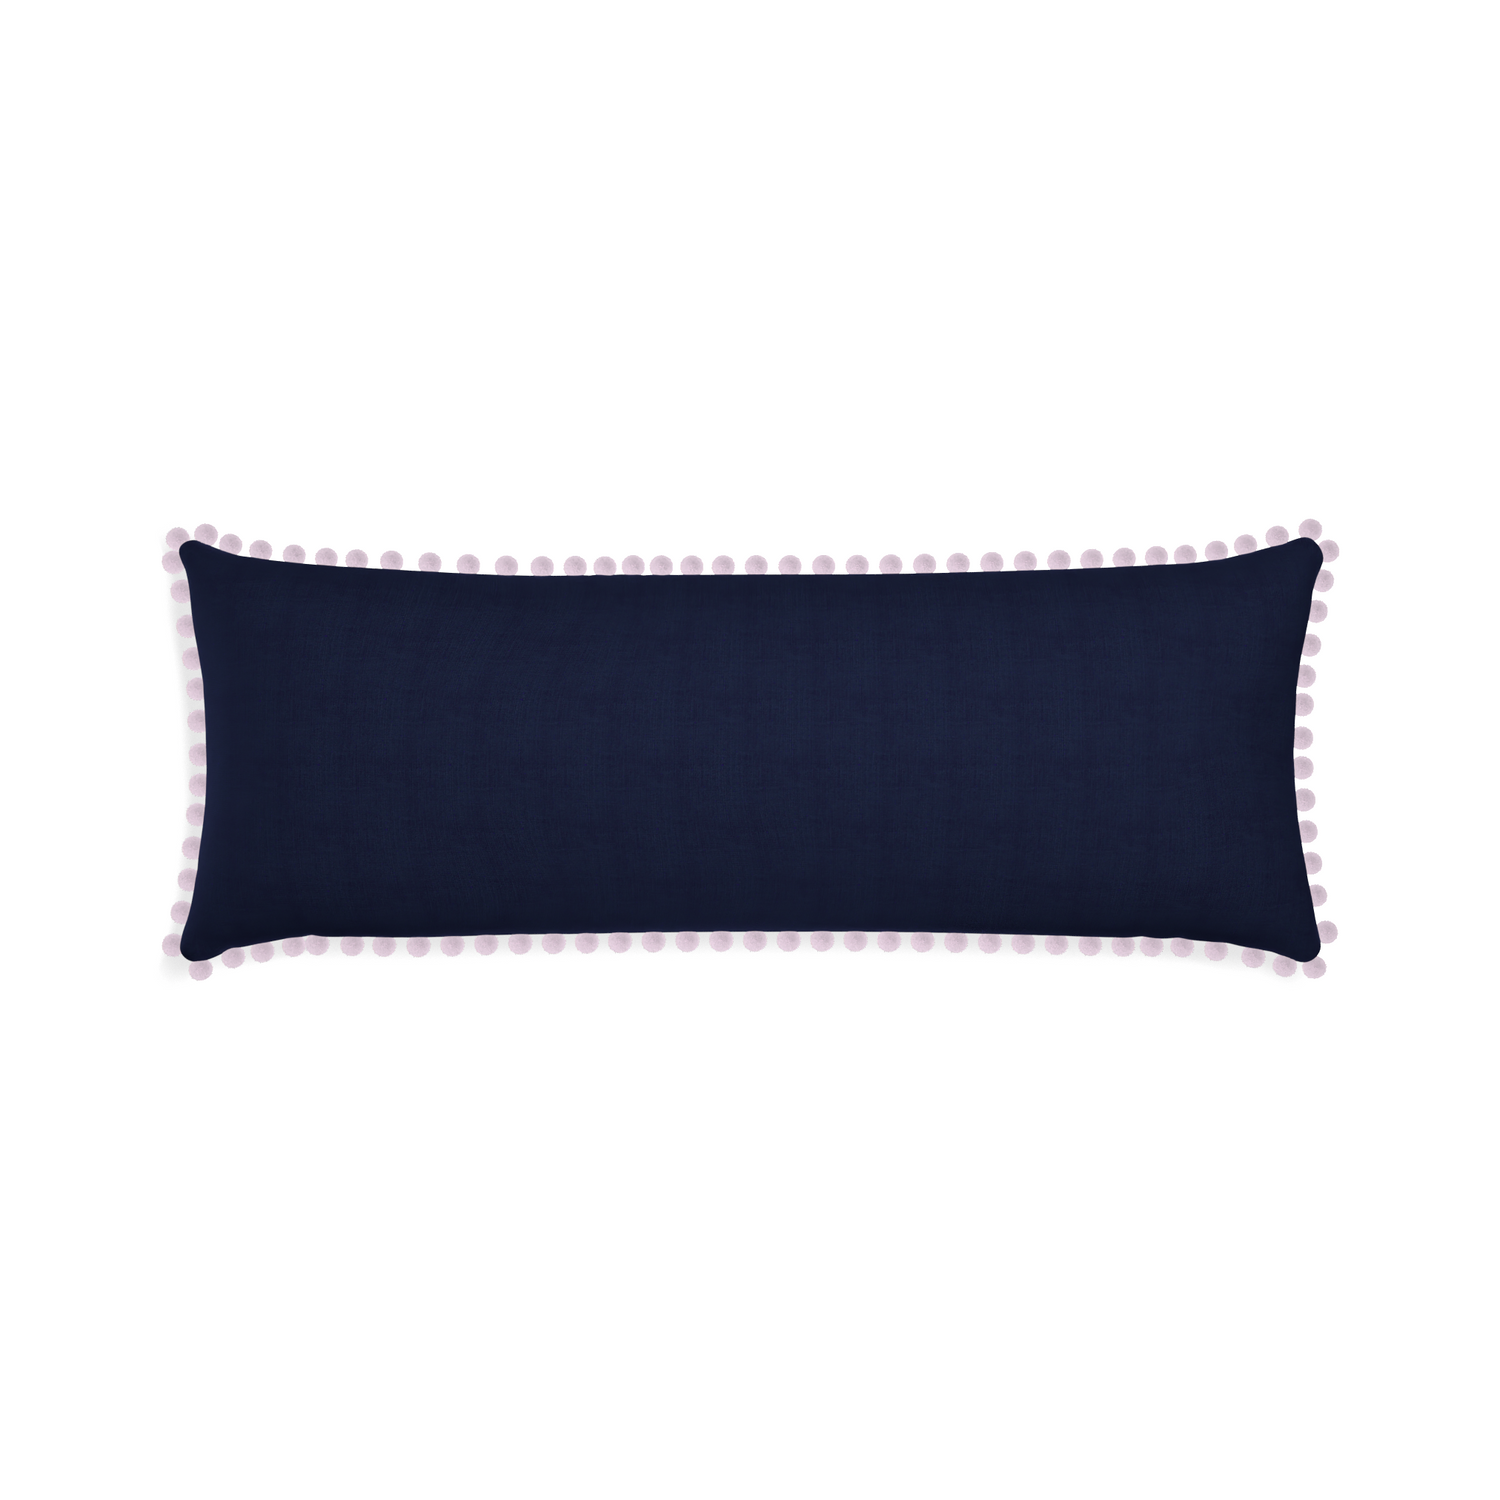 Xl-lumbar midnight custom navy bluepillow with l on white background